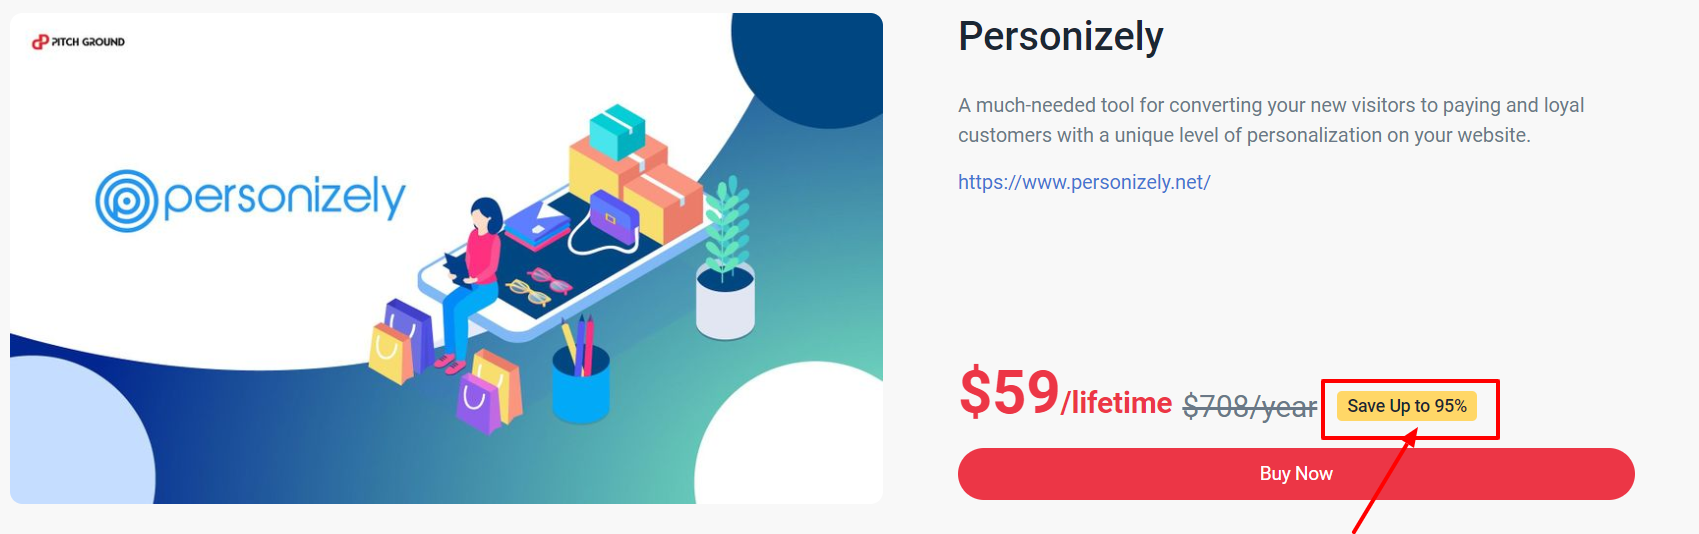  Pitchground Deals &Offers Review- Personizely